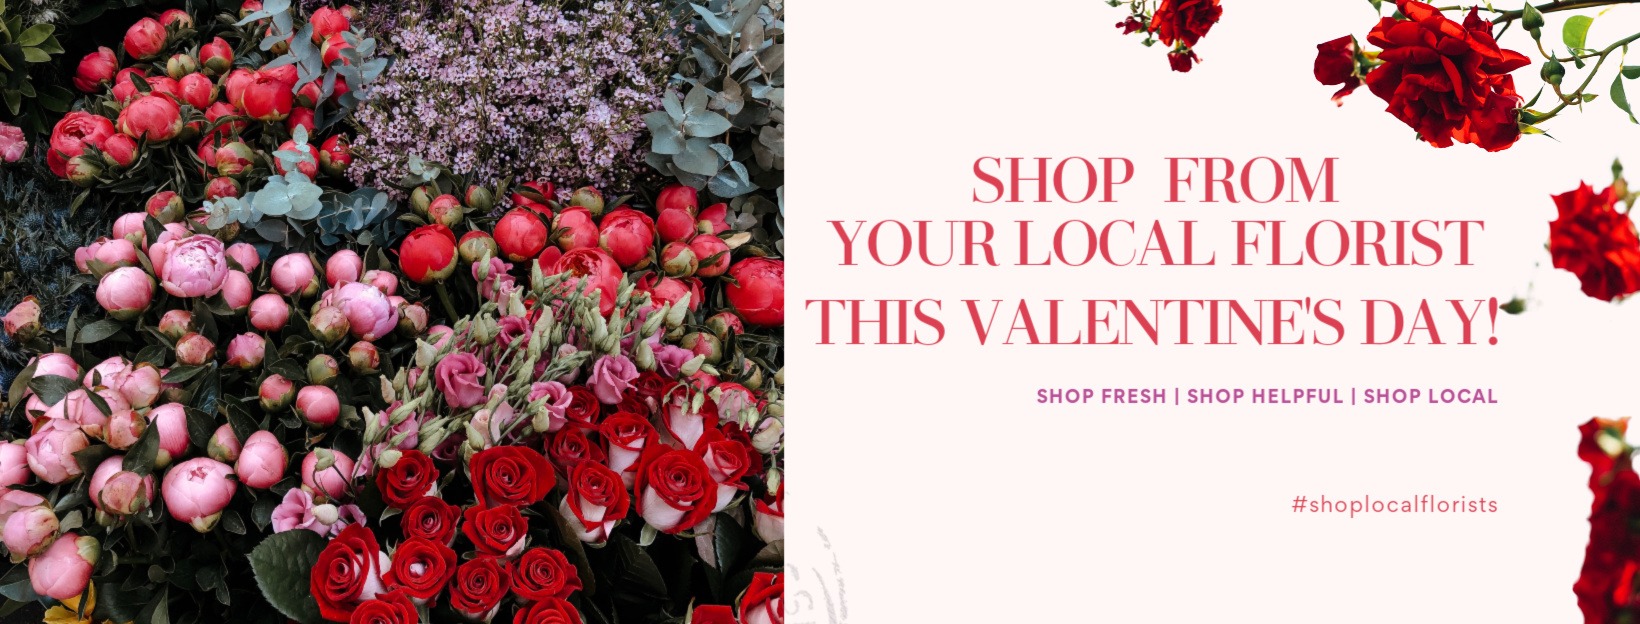 BUY FROM YOUR LOCAL FLORIST!